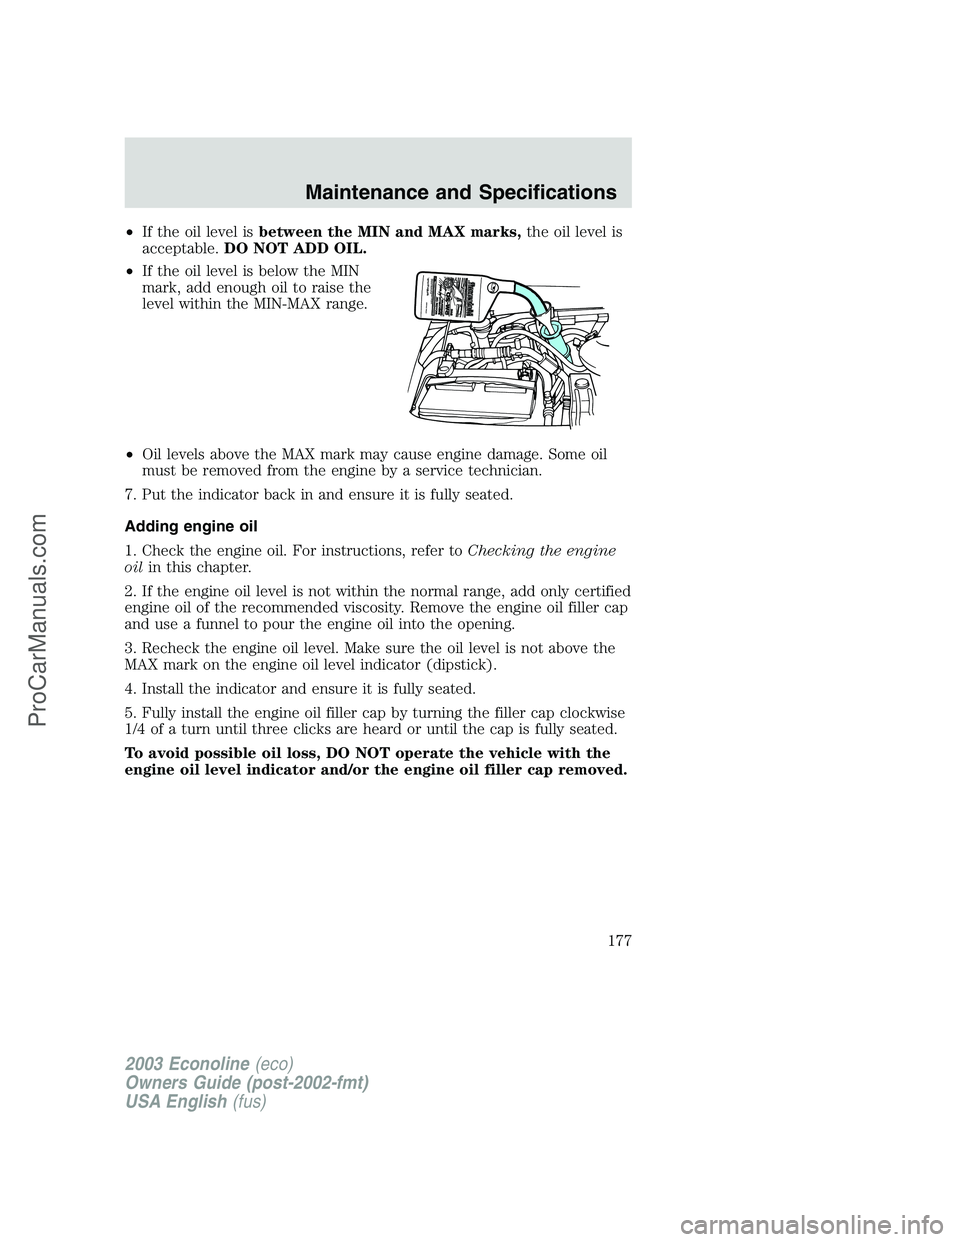 FORD ECONOLINE 2003  Owners Manual •If the oil level isbetween the MIN and MAX marks,the oil level is
acceptable.DO NOT ADD OIL.
•If the oil level is below the MIN
mark, add enough oil to raise the
level within the MIN-MAX range.
�